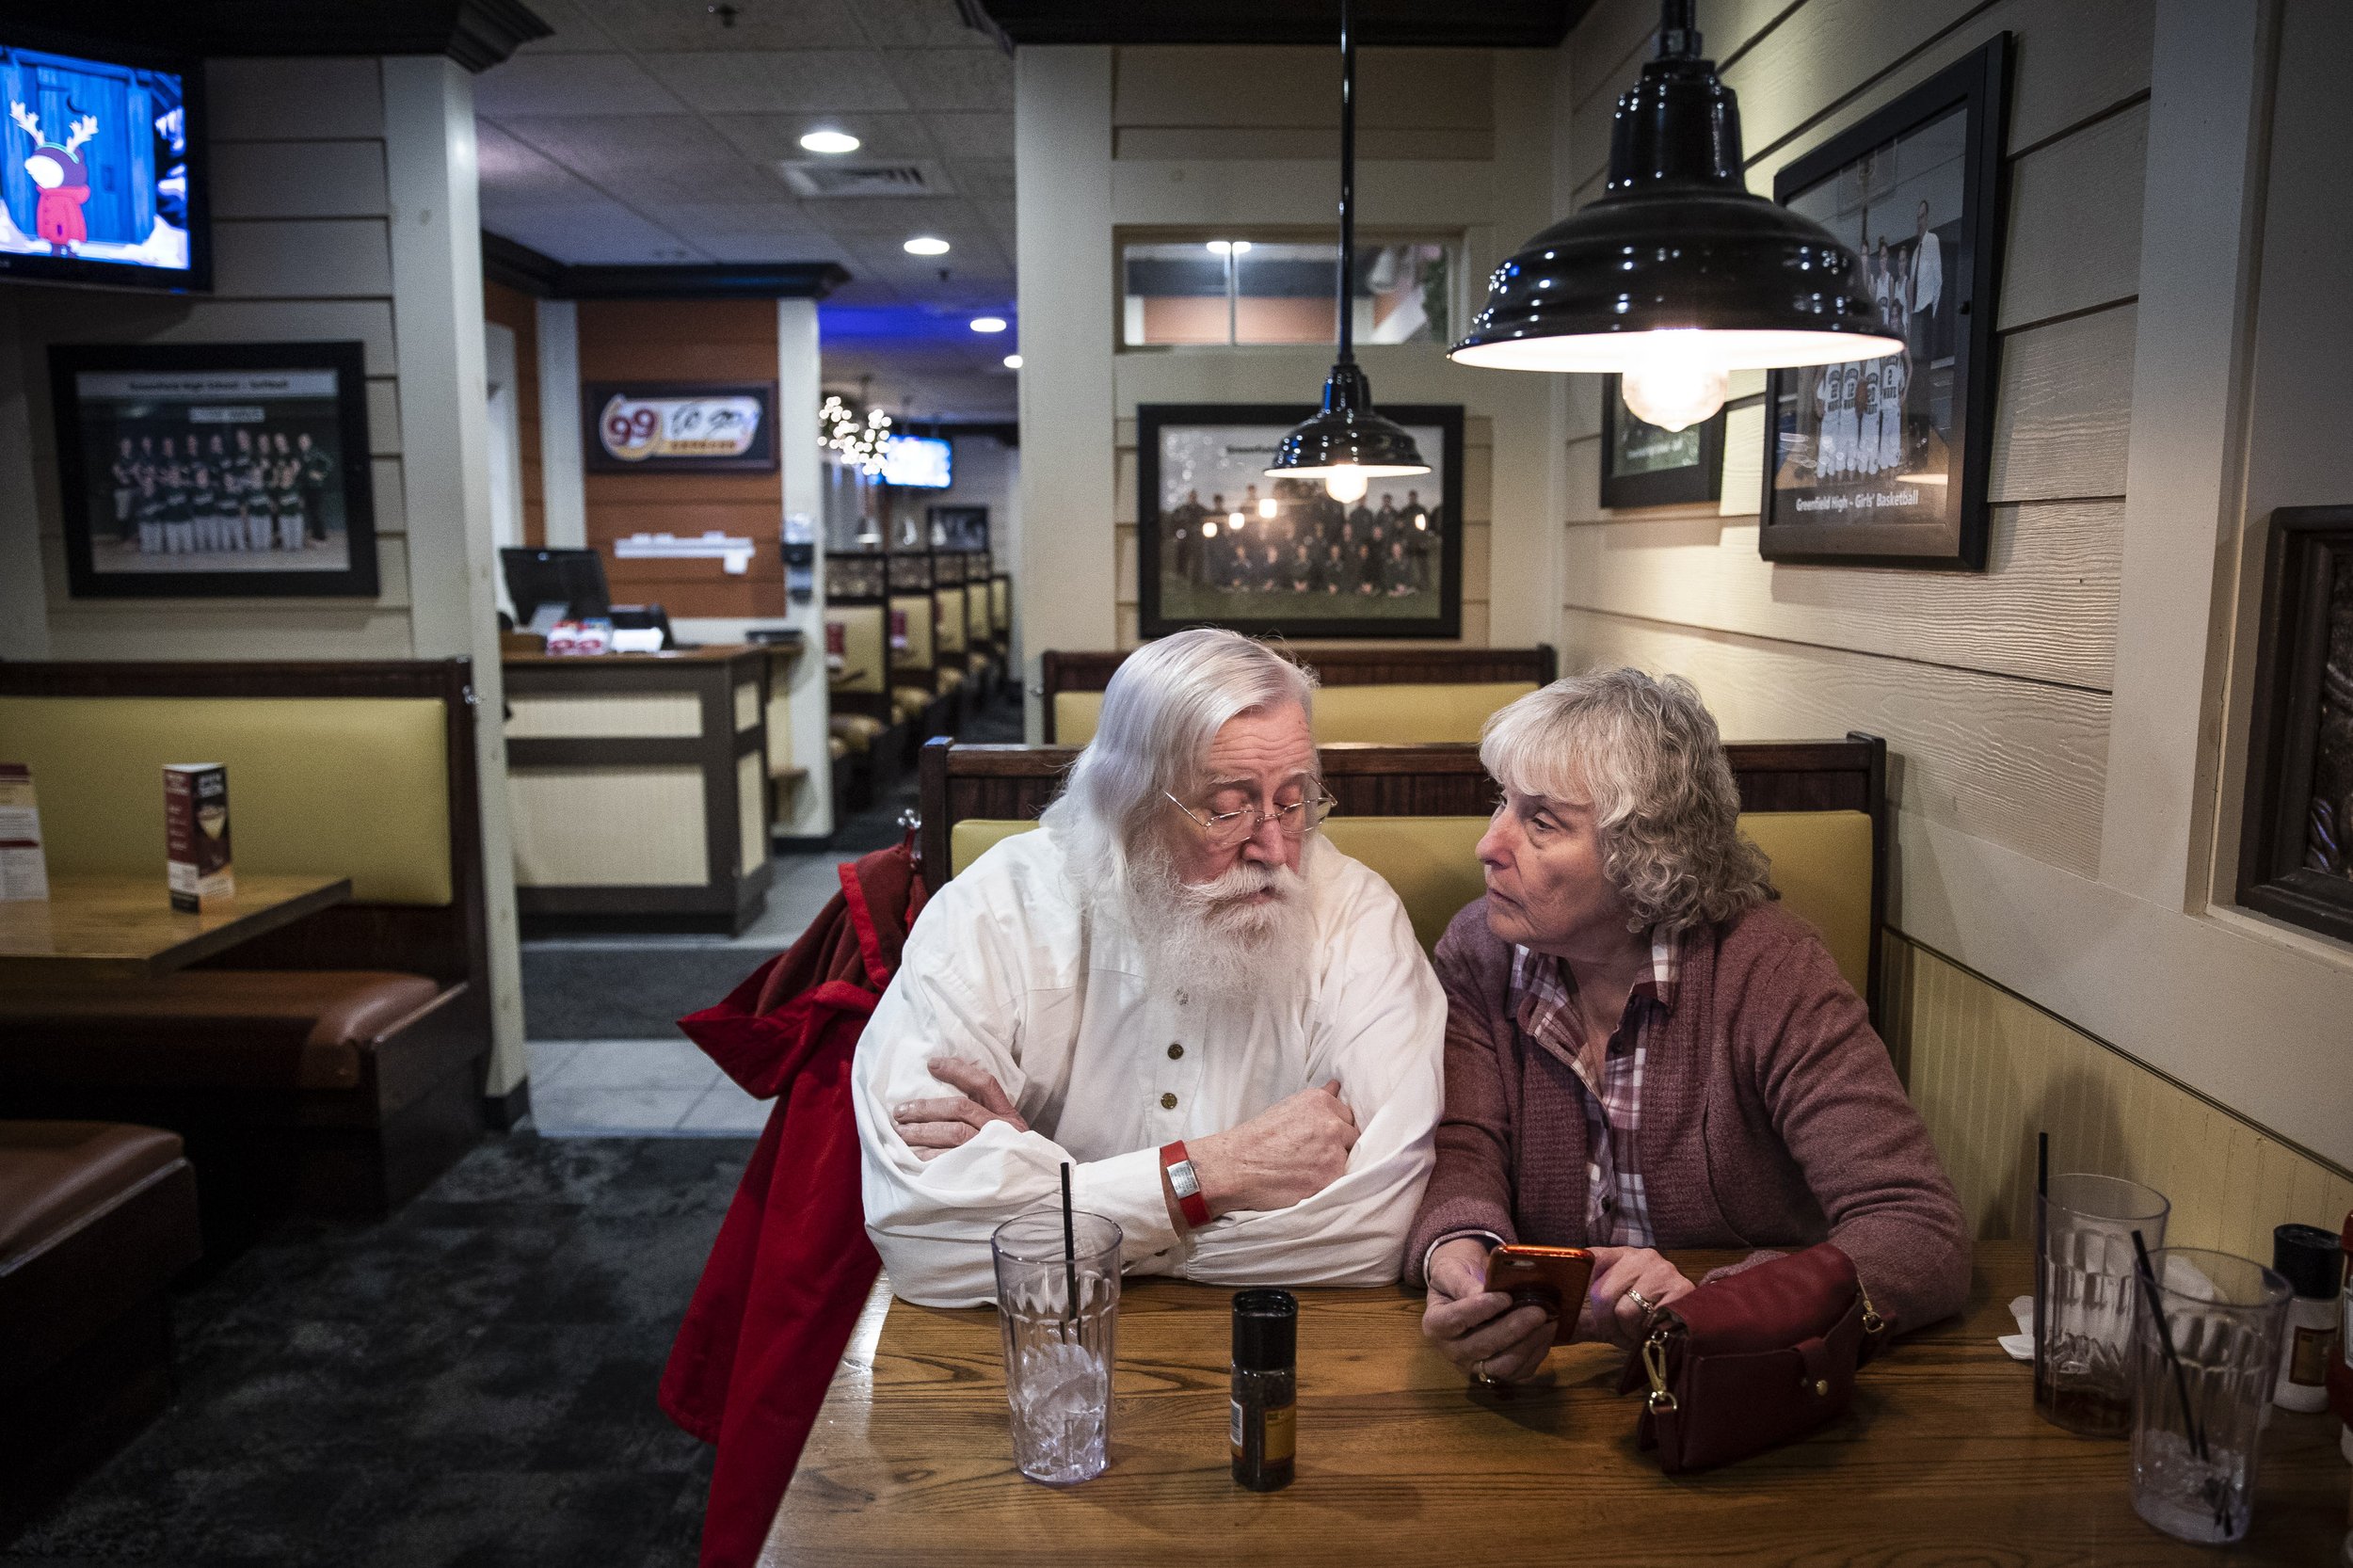  Lenny and Becki Stratton sit at 99 Restaurant in Greenfield, Mass. and go over their Claus schedule for the week on December 11, 2022. There are two weeks left until Christmas and they don’t have many days left open. The couple makes sure to keep th